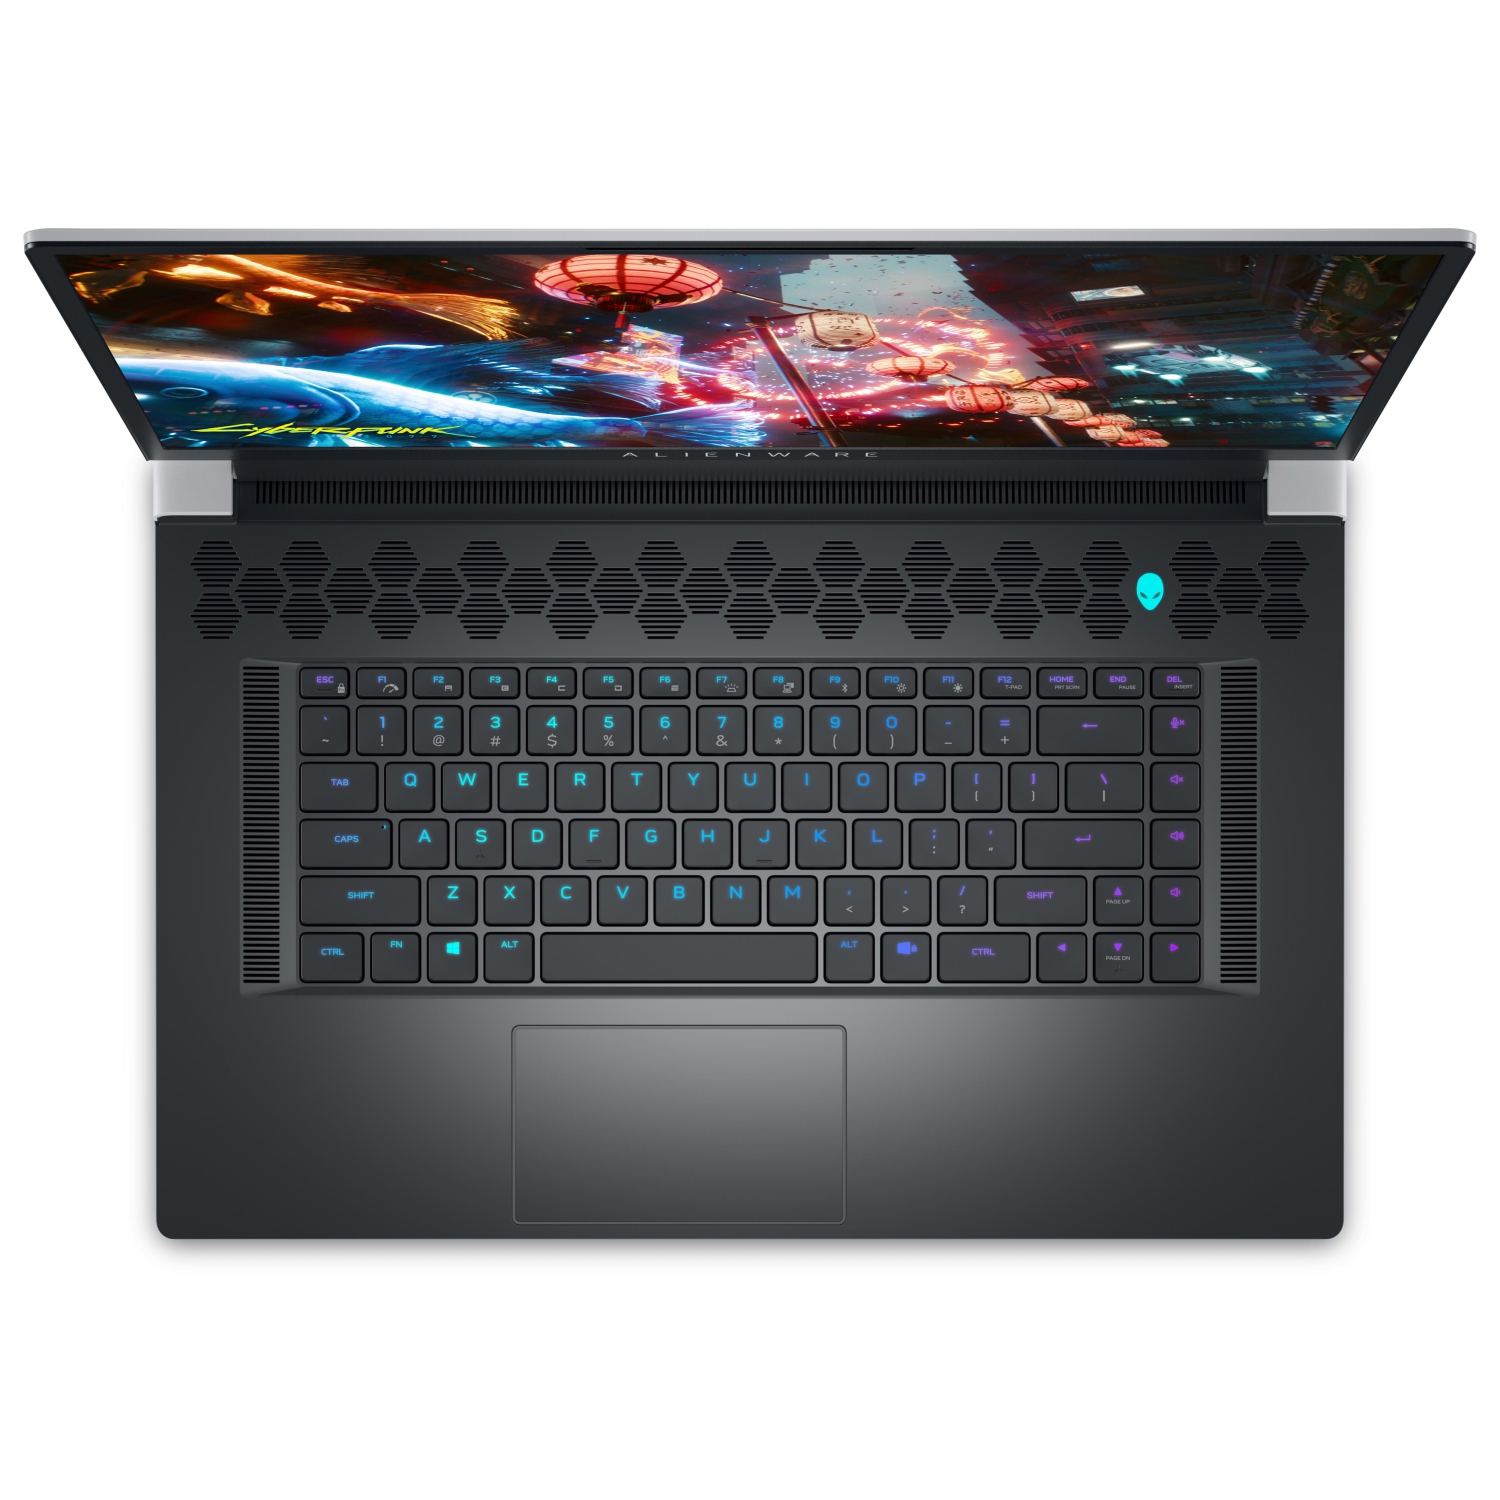 Refurbished (Excellent) – Dell Alienware X17 R2 Gaming Laptop (2022) | 17.3" FHD | Core i9 - 512GB SSD - 16GB RAM - 3080 Ti | 14 Cores @ 5 GHz - 12th Gen CPU - 12GB GDDR6X